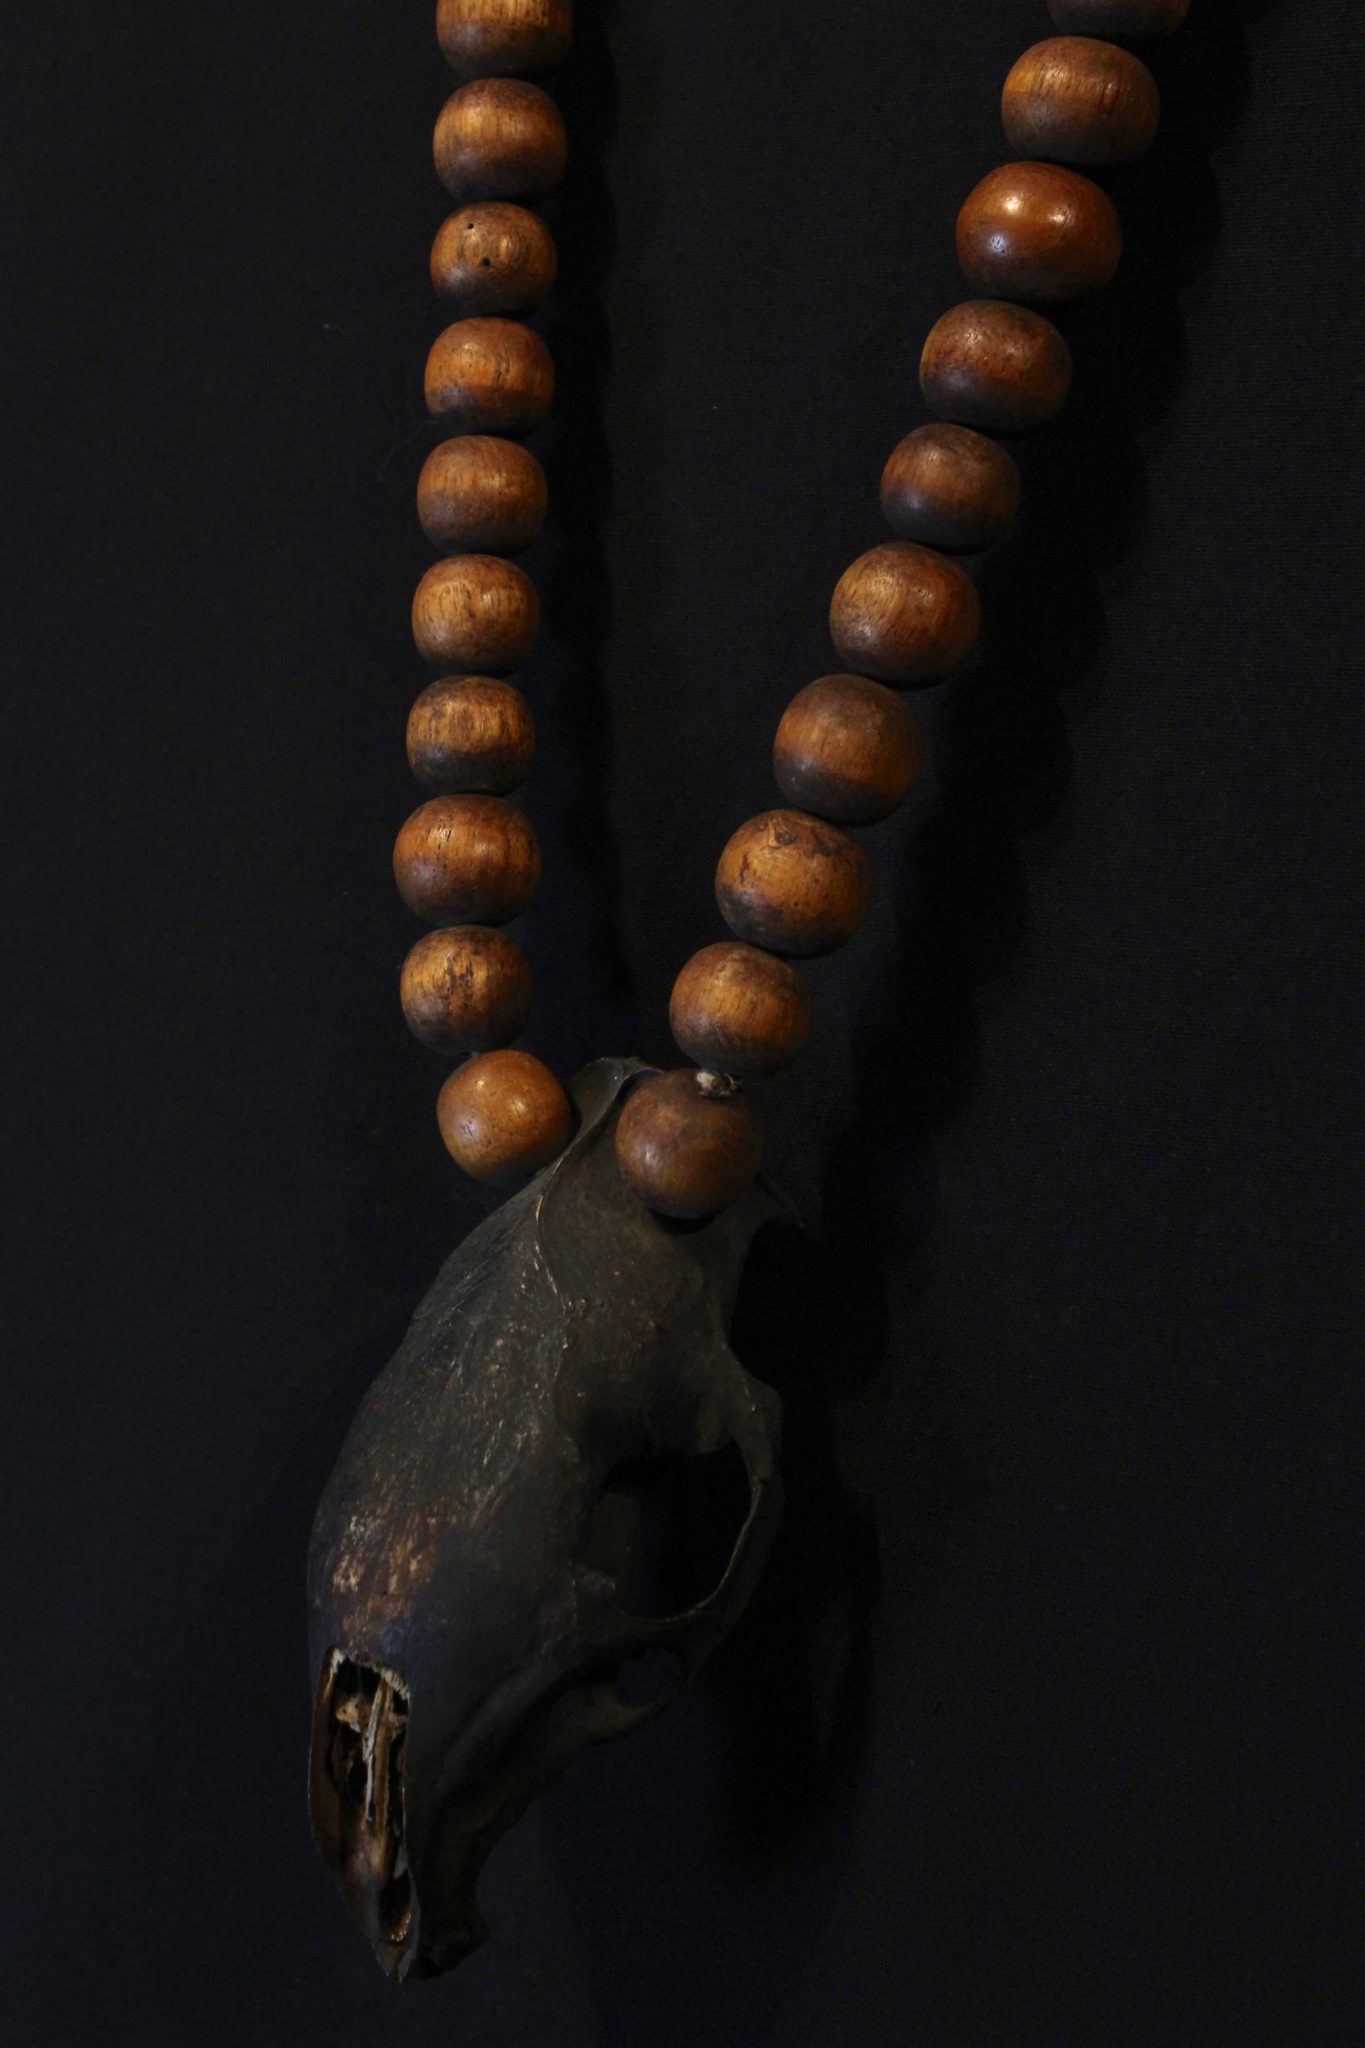 Skull Necklace Kalimantan, Borneo, Indonesia, Dayak tribe, Early 20th c, Wooden Beads, Rodent Skull, darkened with soot. Worn for healing and protection rituals 17 ½” x 2 ¾” x 1 ¾”, $450.